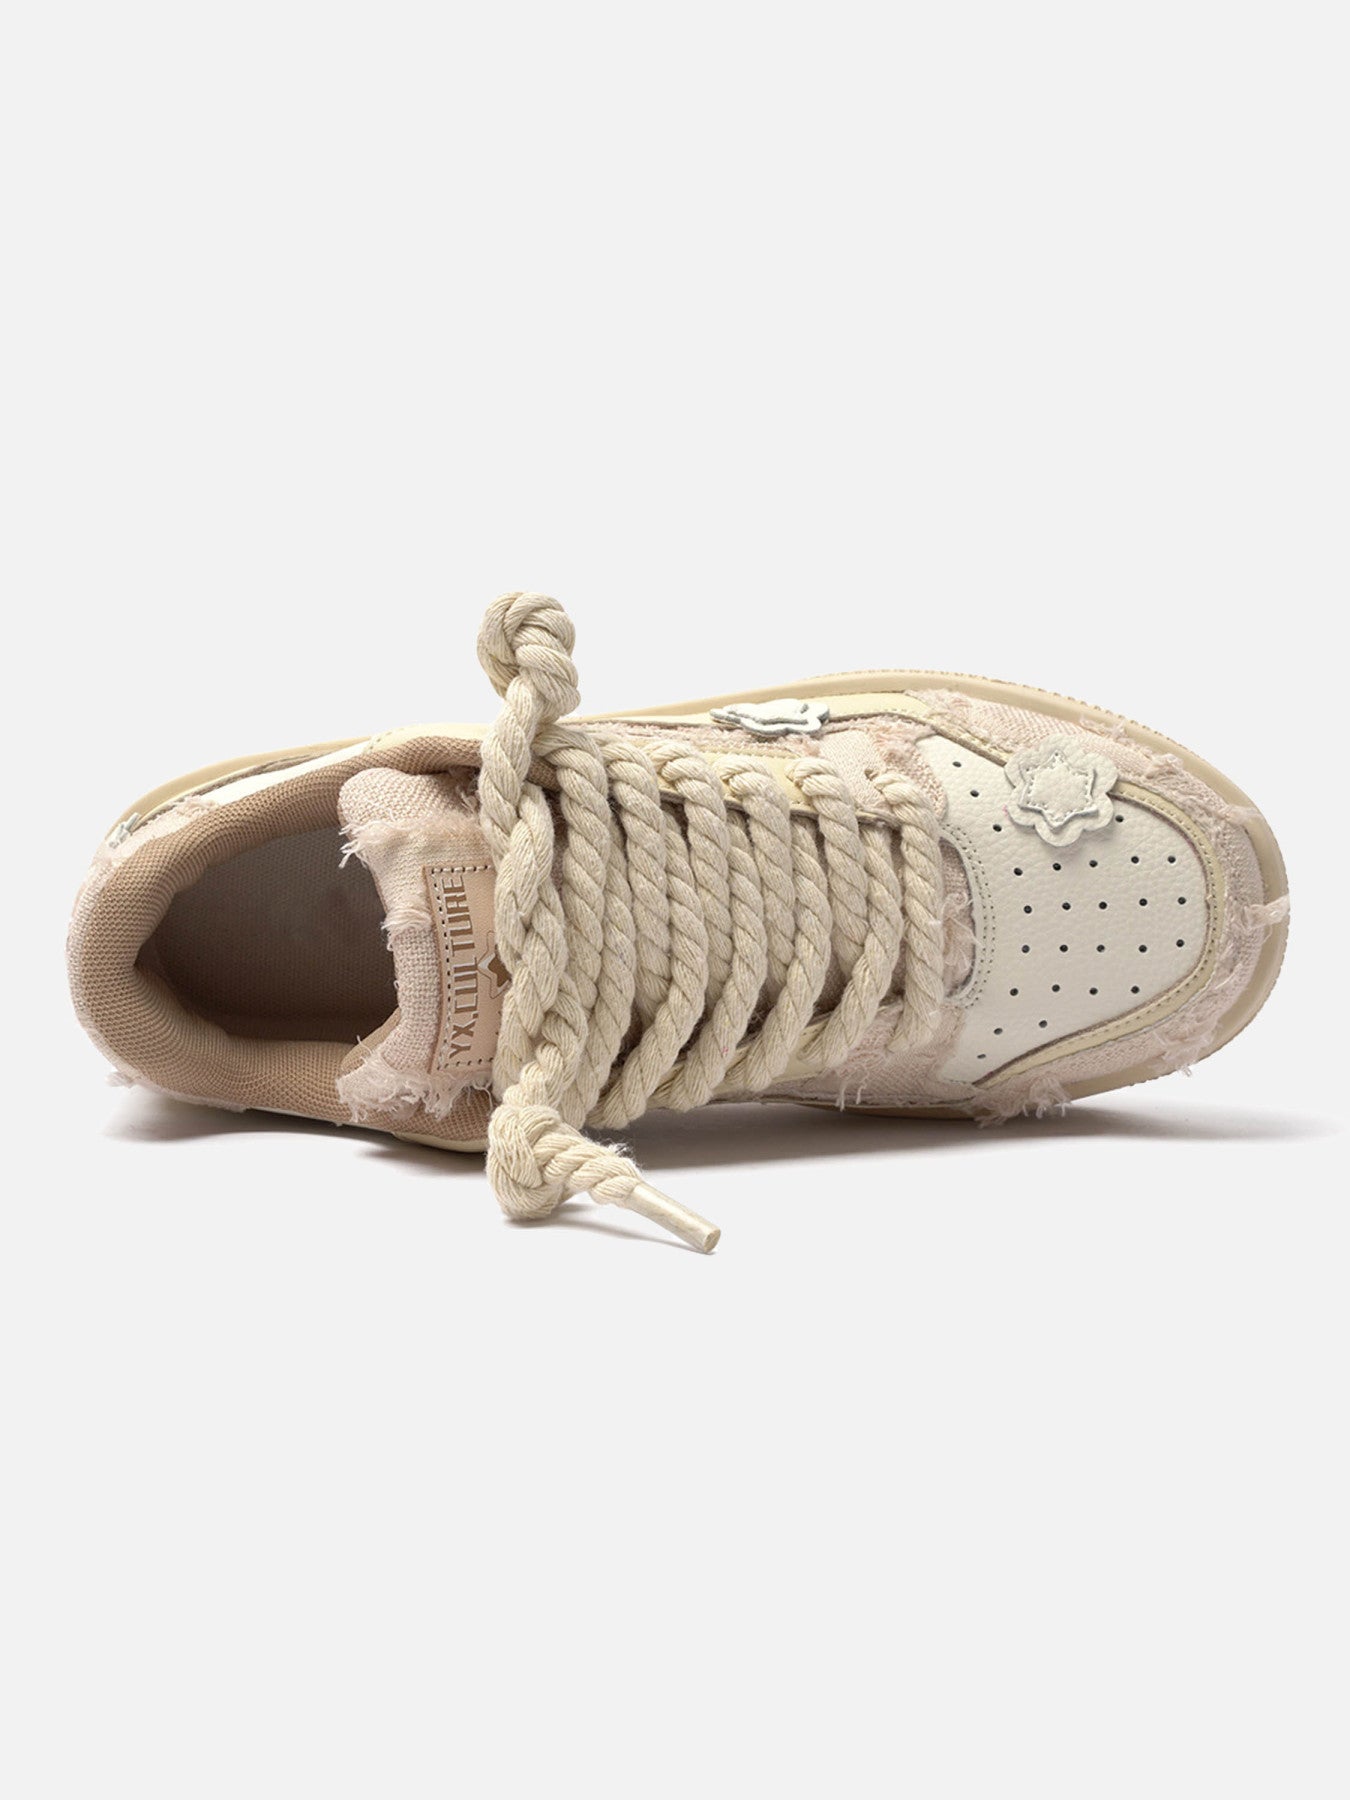 The Supermade Twine Low-top Board Shoes